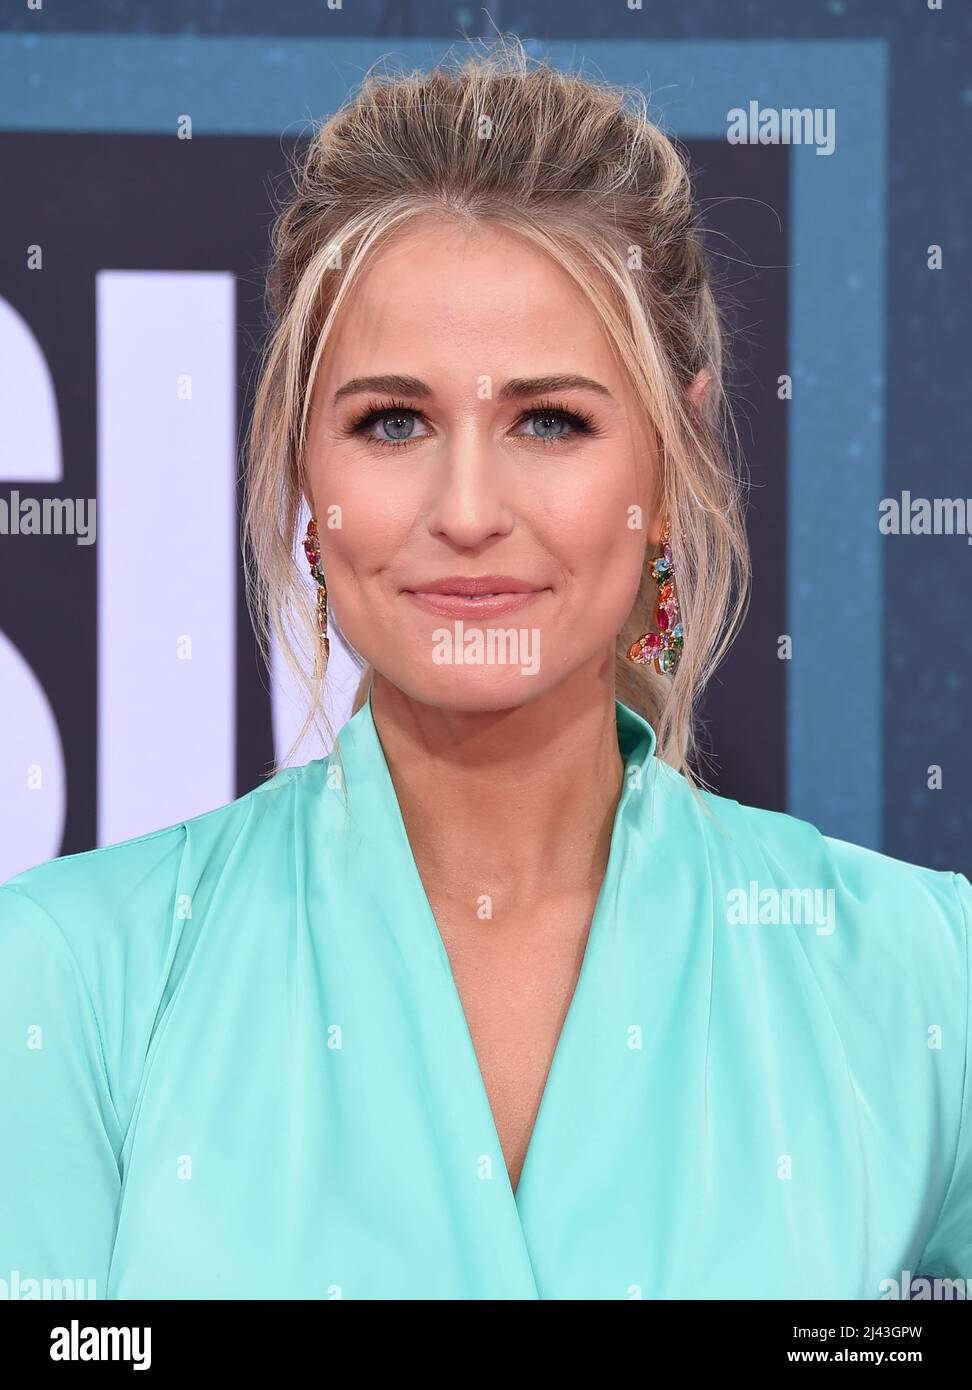 Jillian Cardelli at the 2022 CMT Music Awards held at the Nashville Municipal Auditorium on April 11, 2022 in Nashville, TN. © Tammie Arroyo / AFF-USA.com Stock Photo